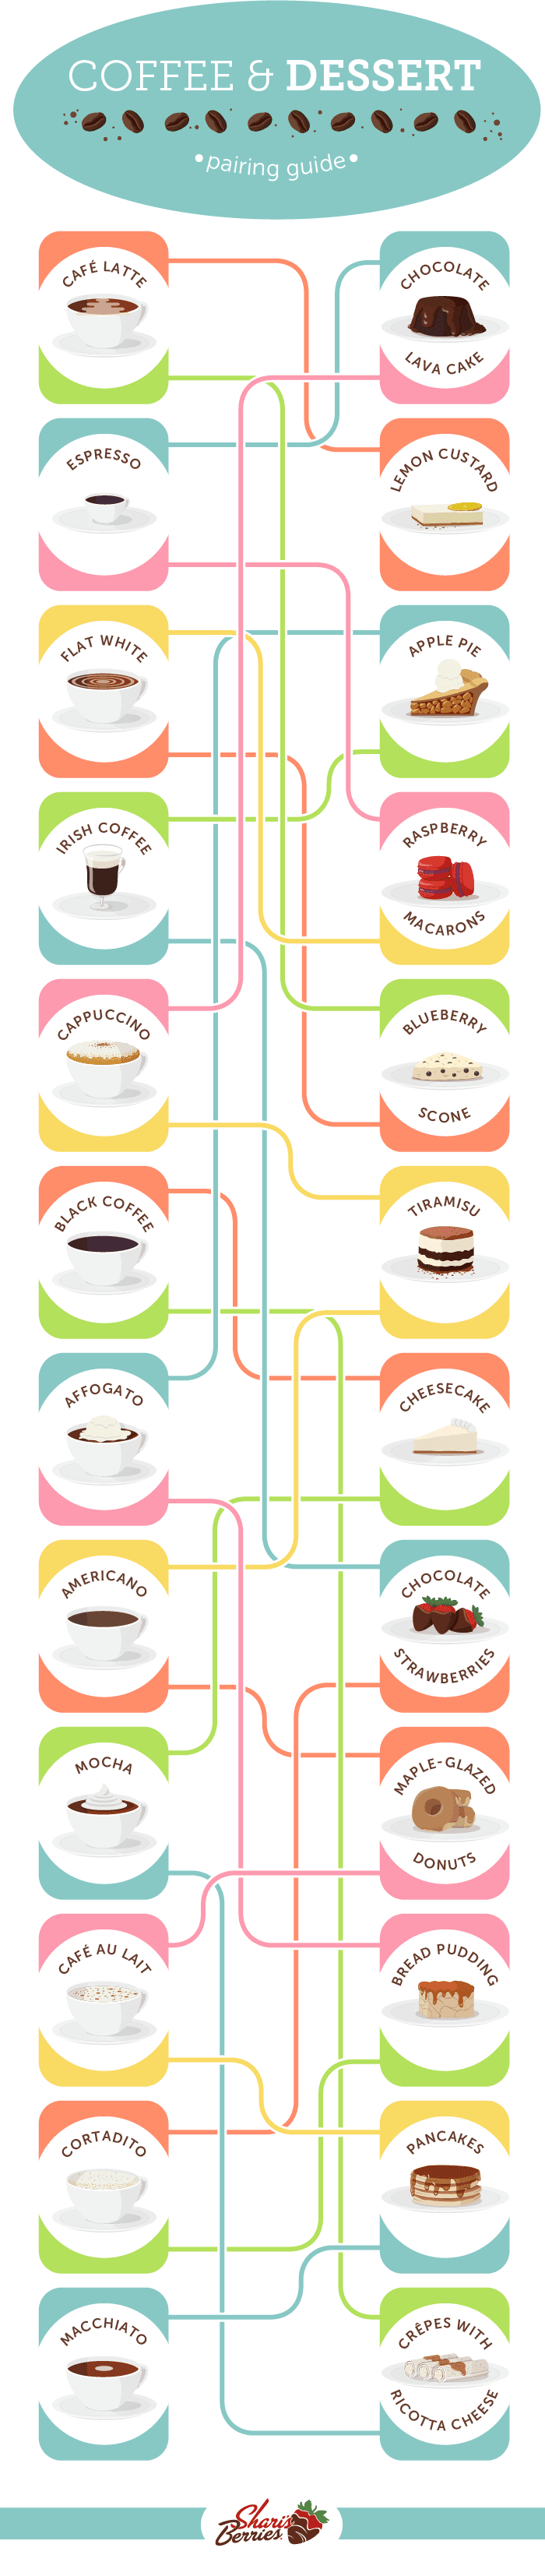 Coffee and Dessert Pairing Guide